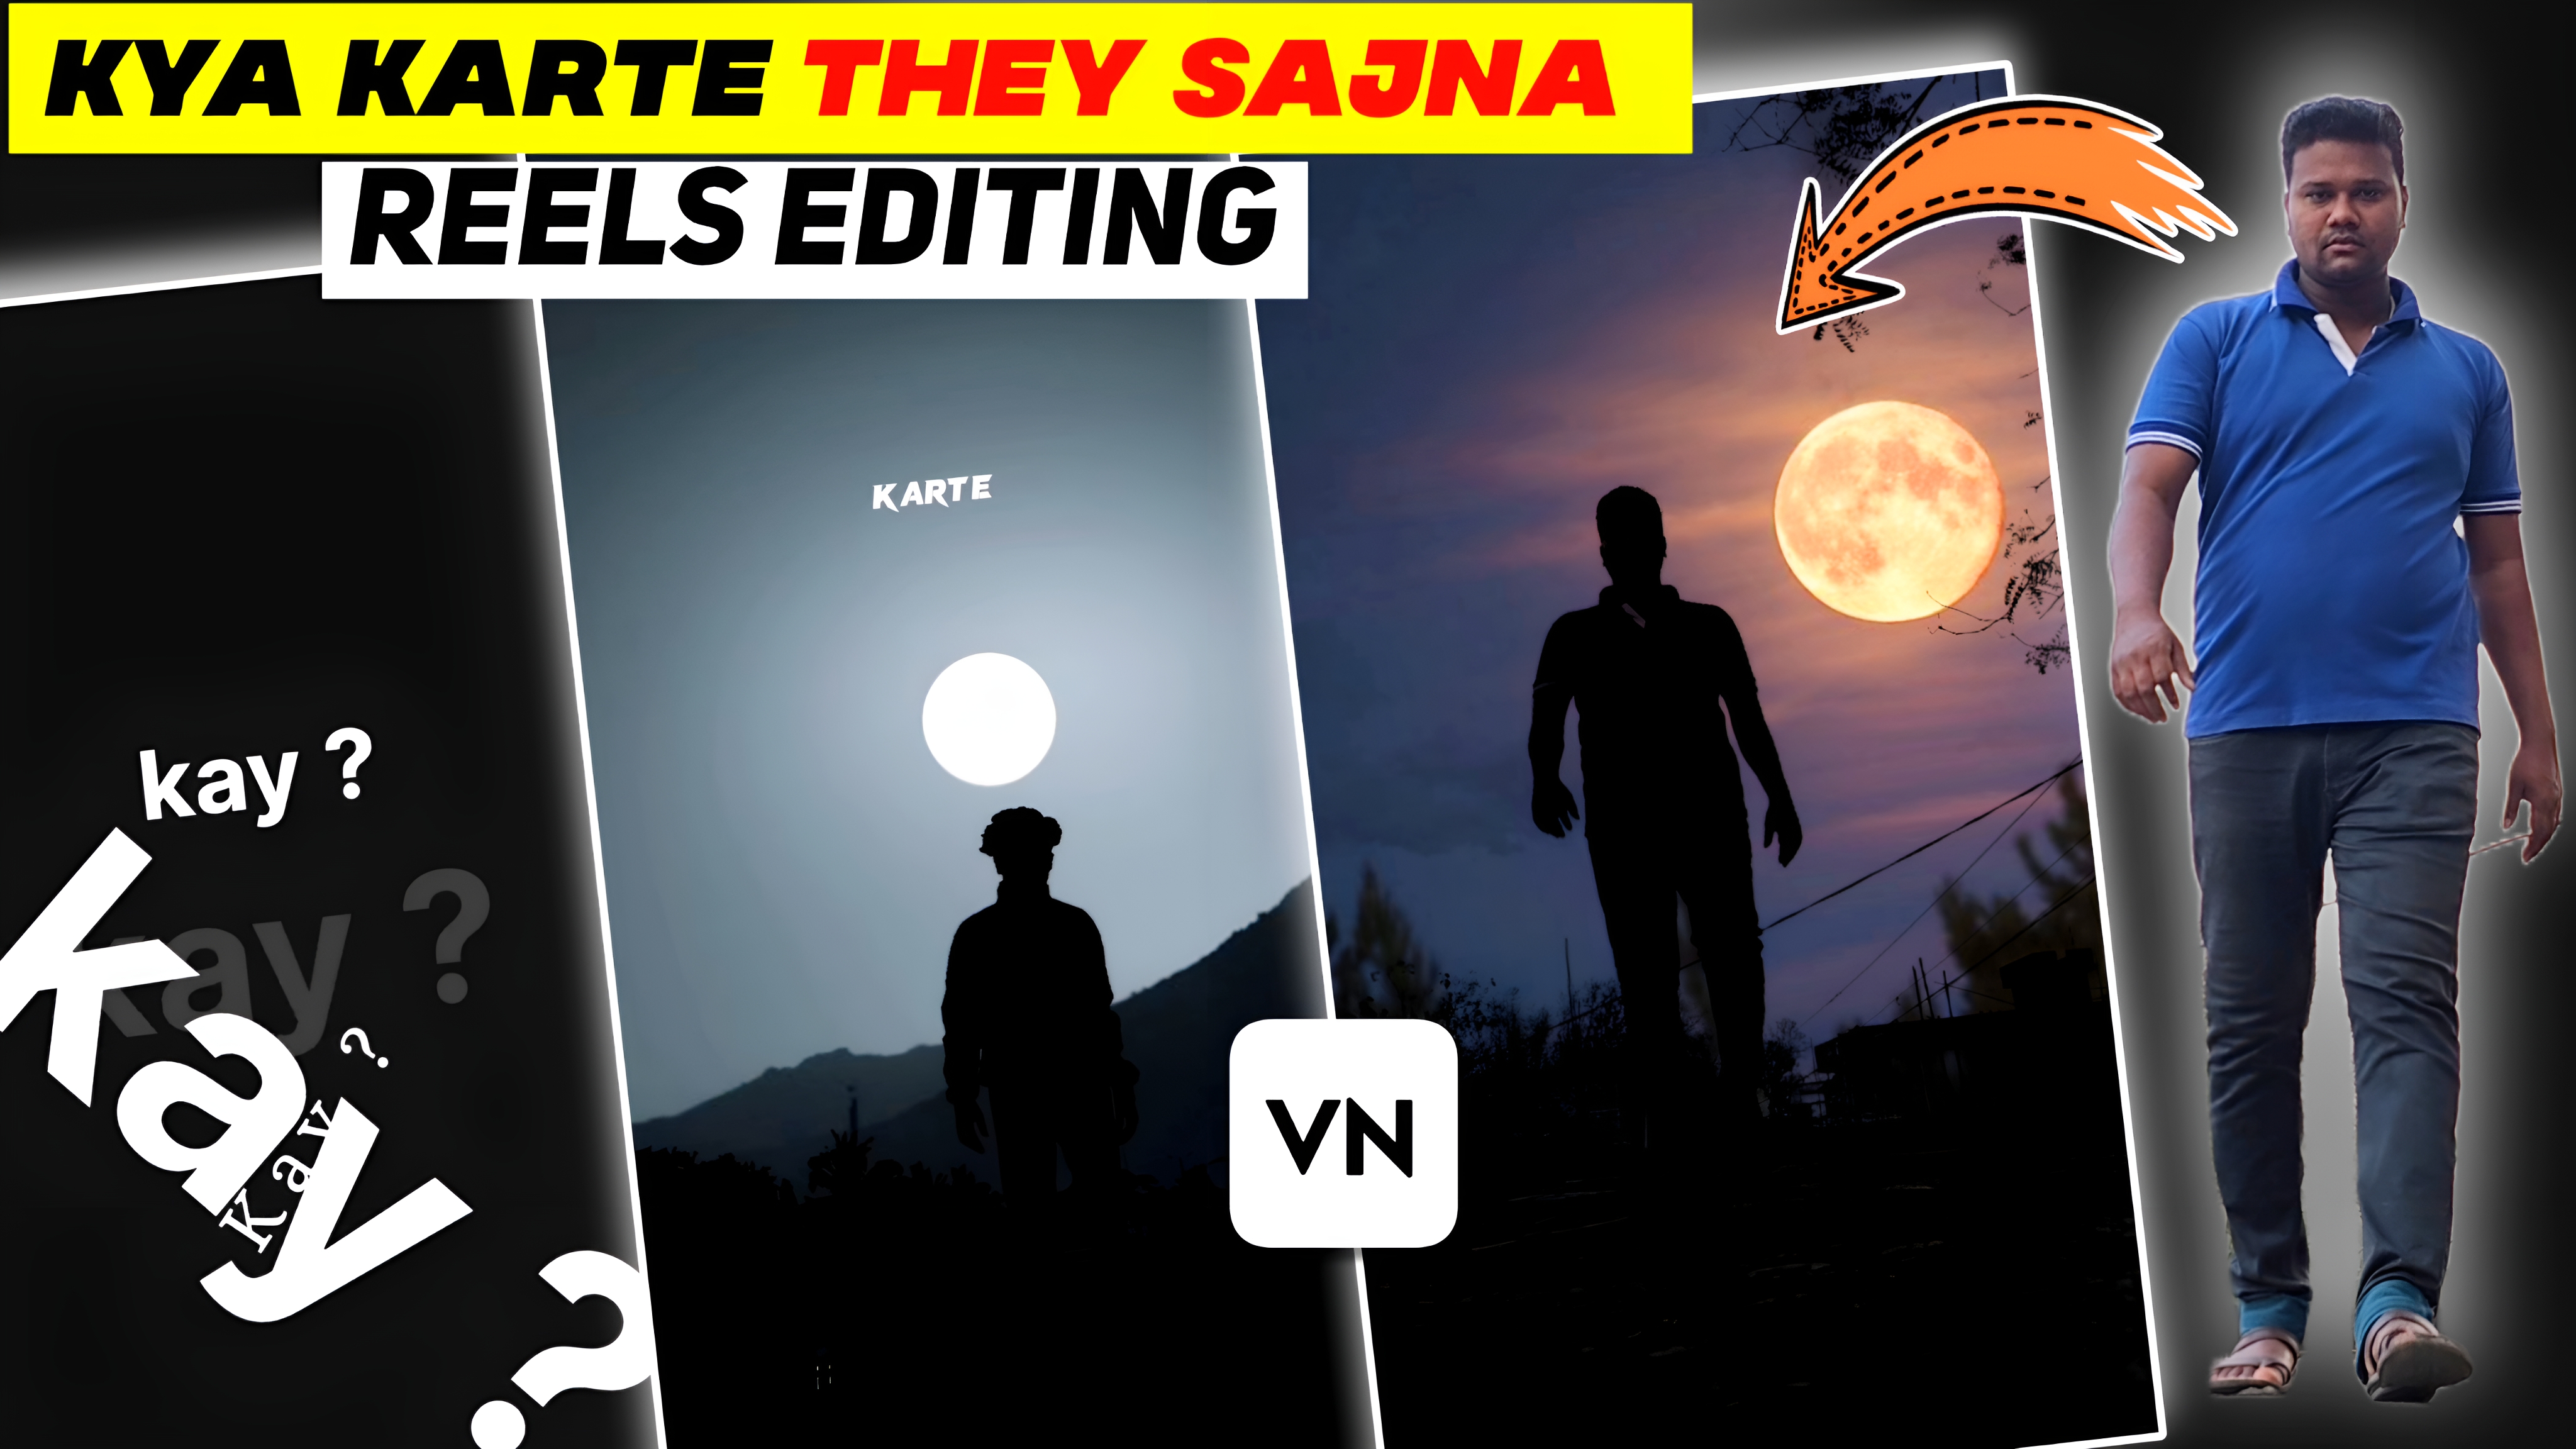 How To Make Aesthetic Video || Kya Karte They Sajna Viral Reels Editing || VN Video Editing